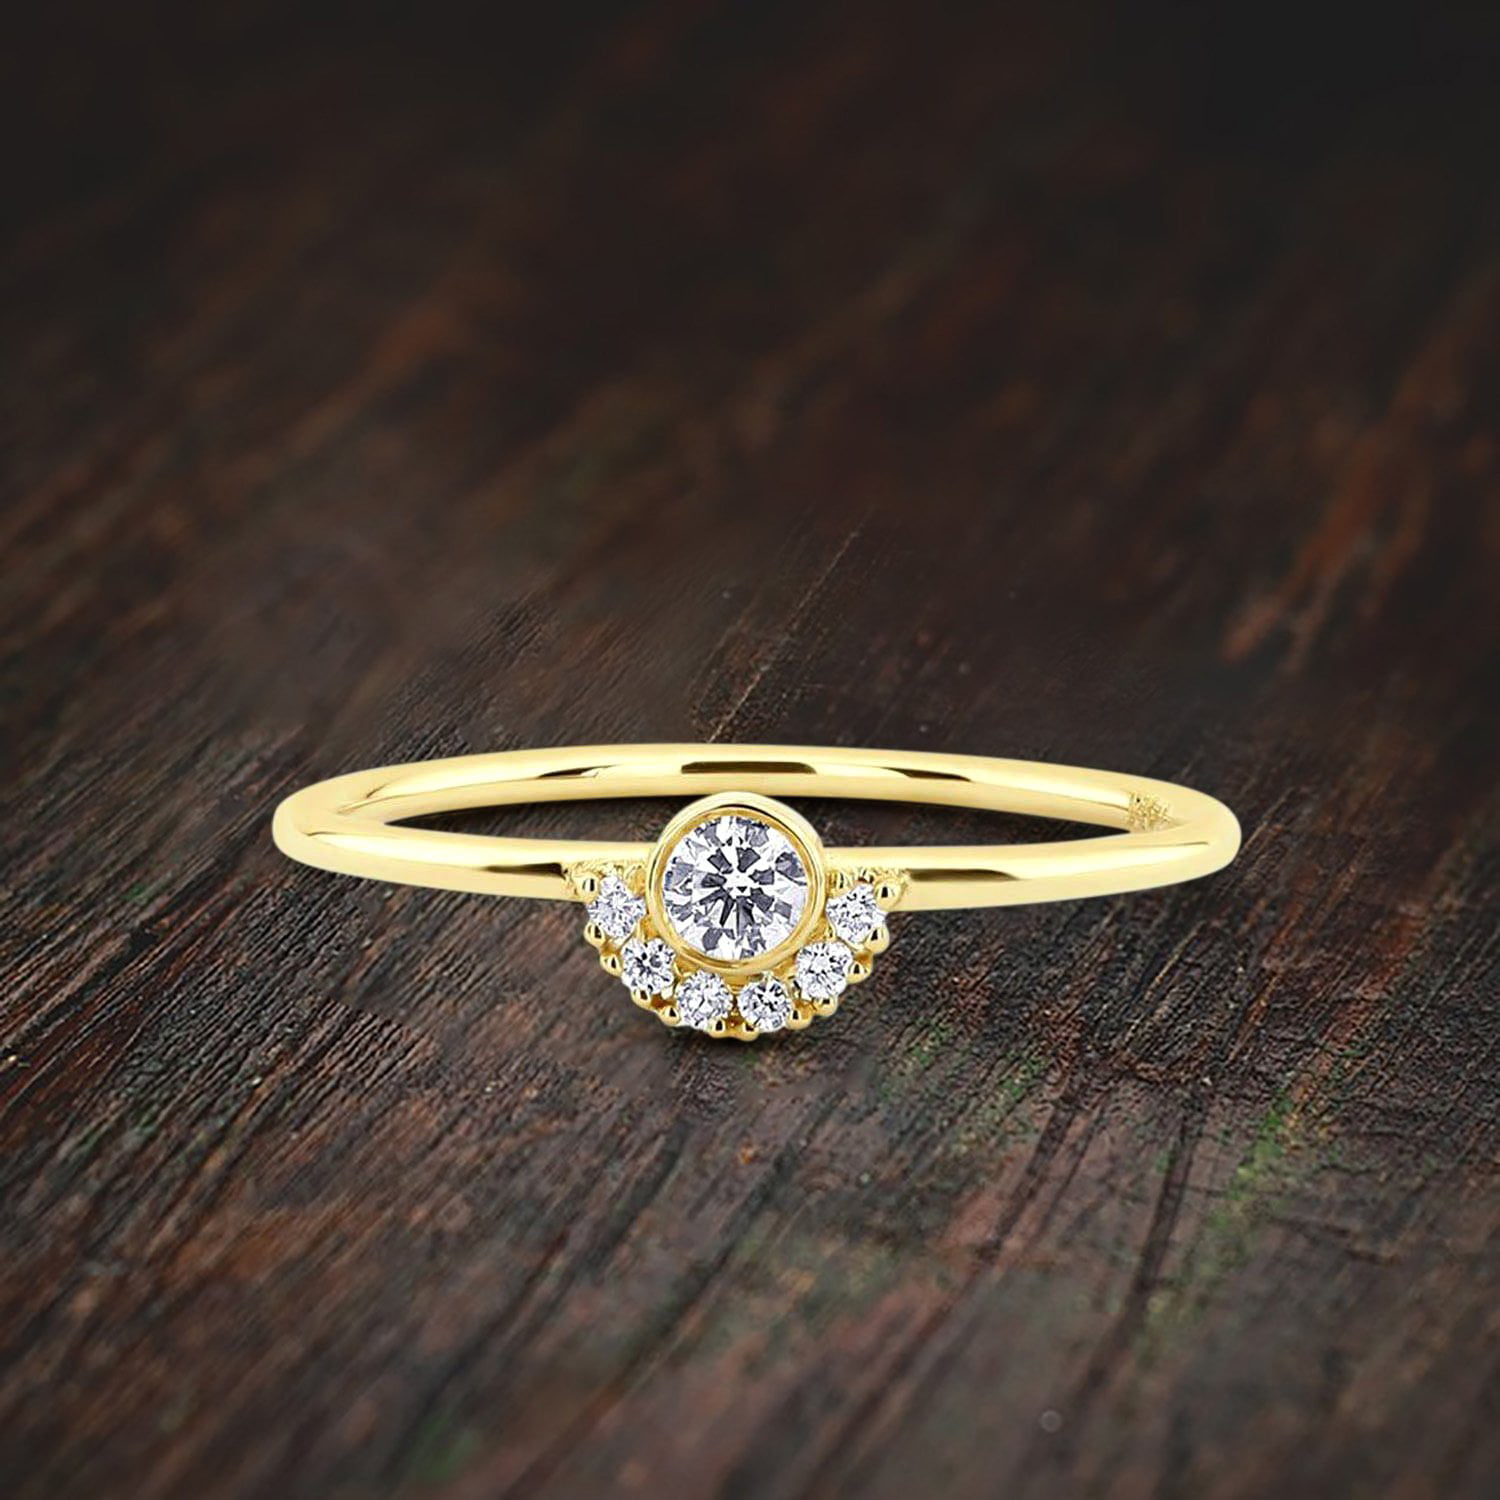 Two Stone Engagement Ring with Half Moon Cut Diamonds – local eclectic